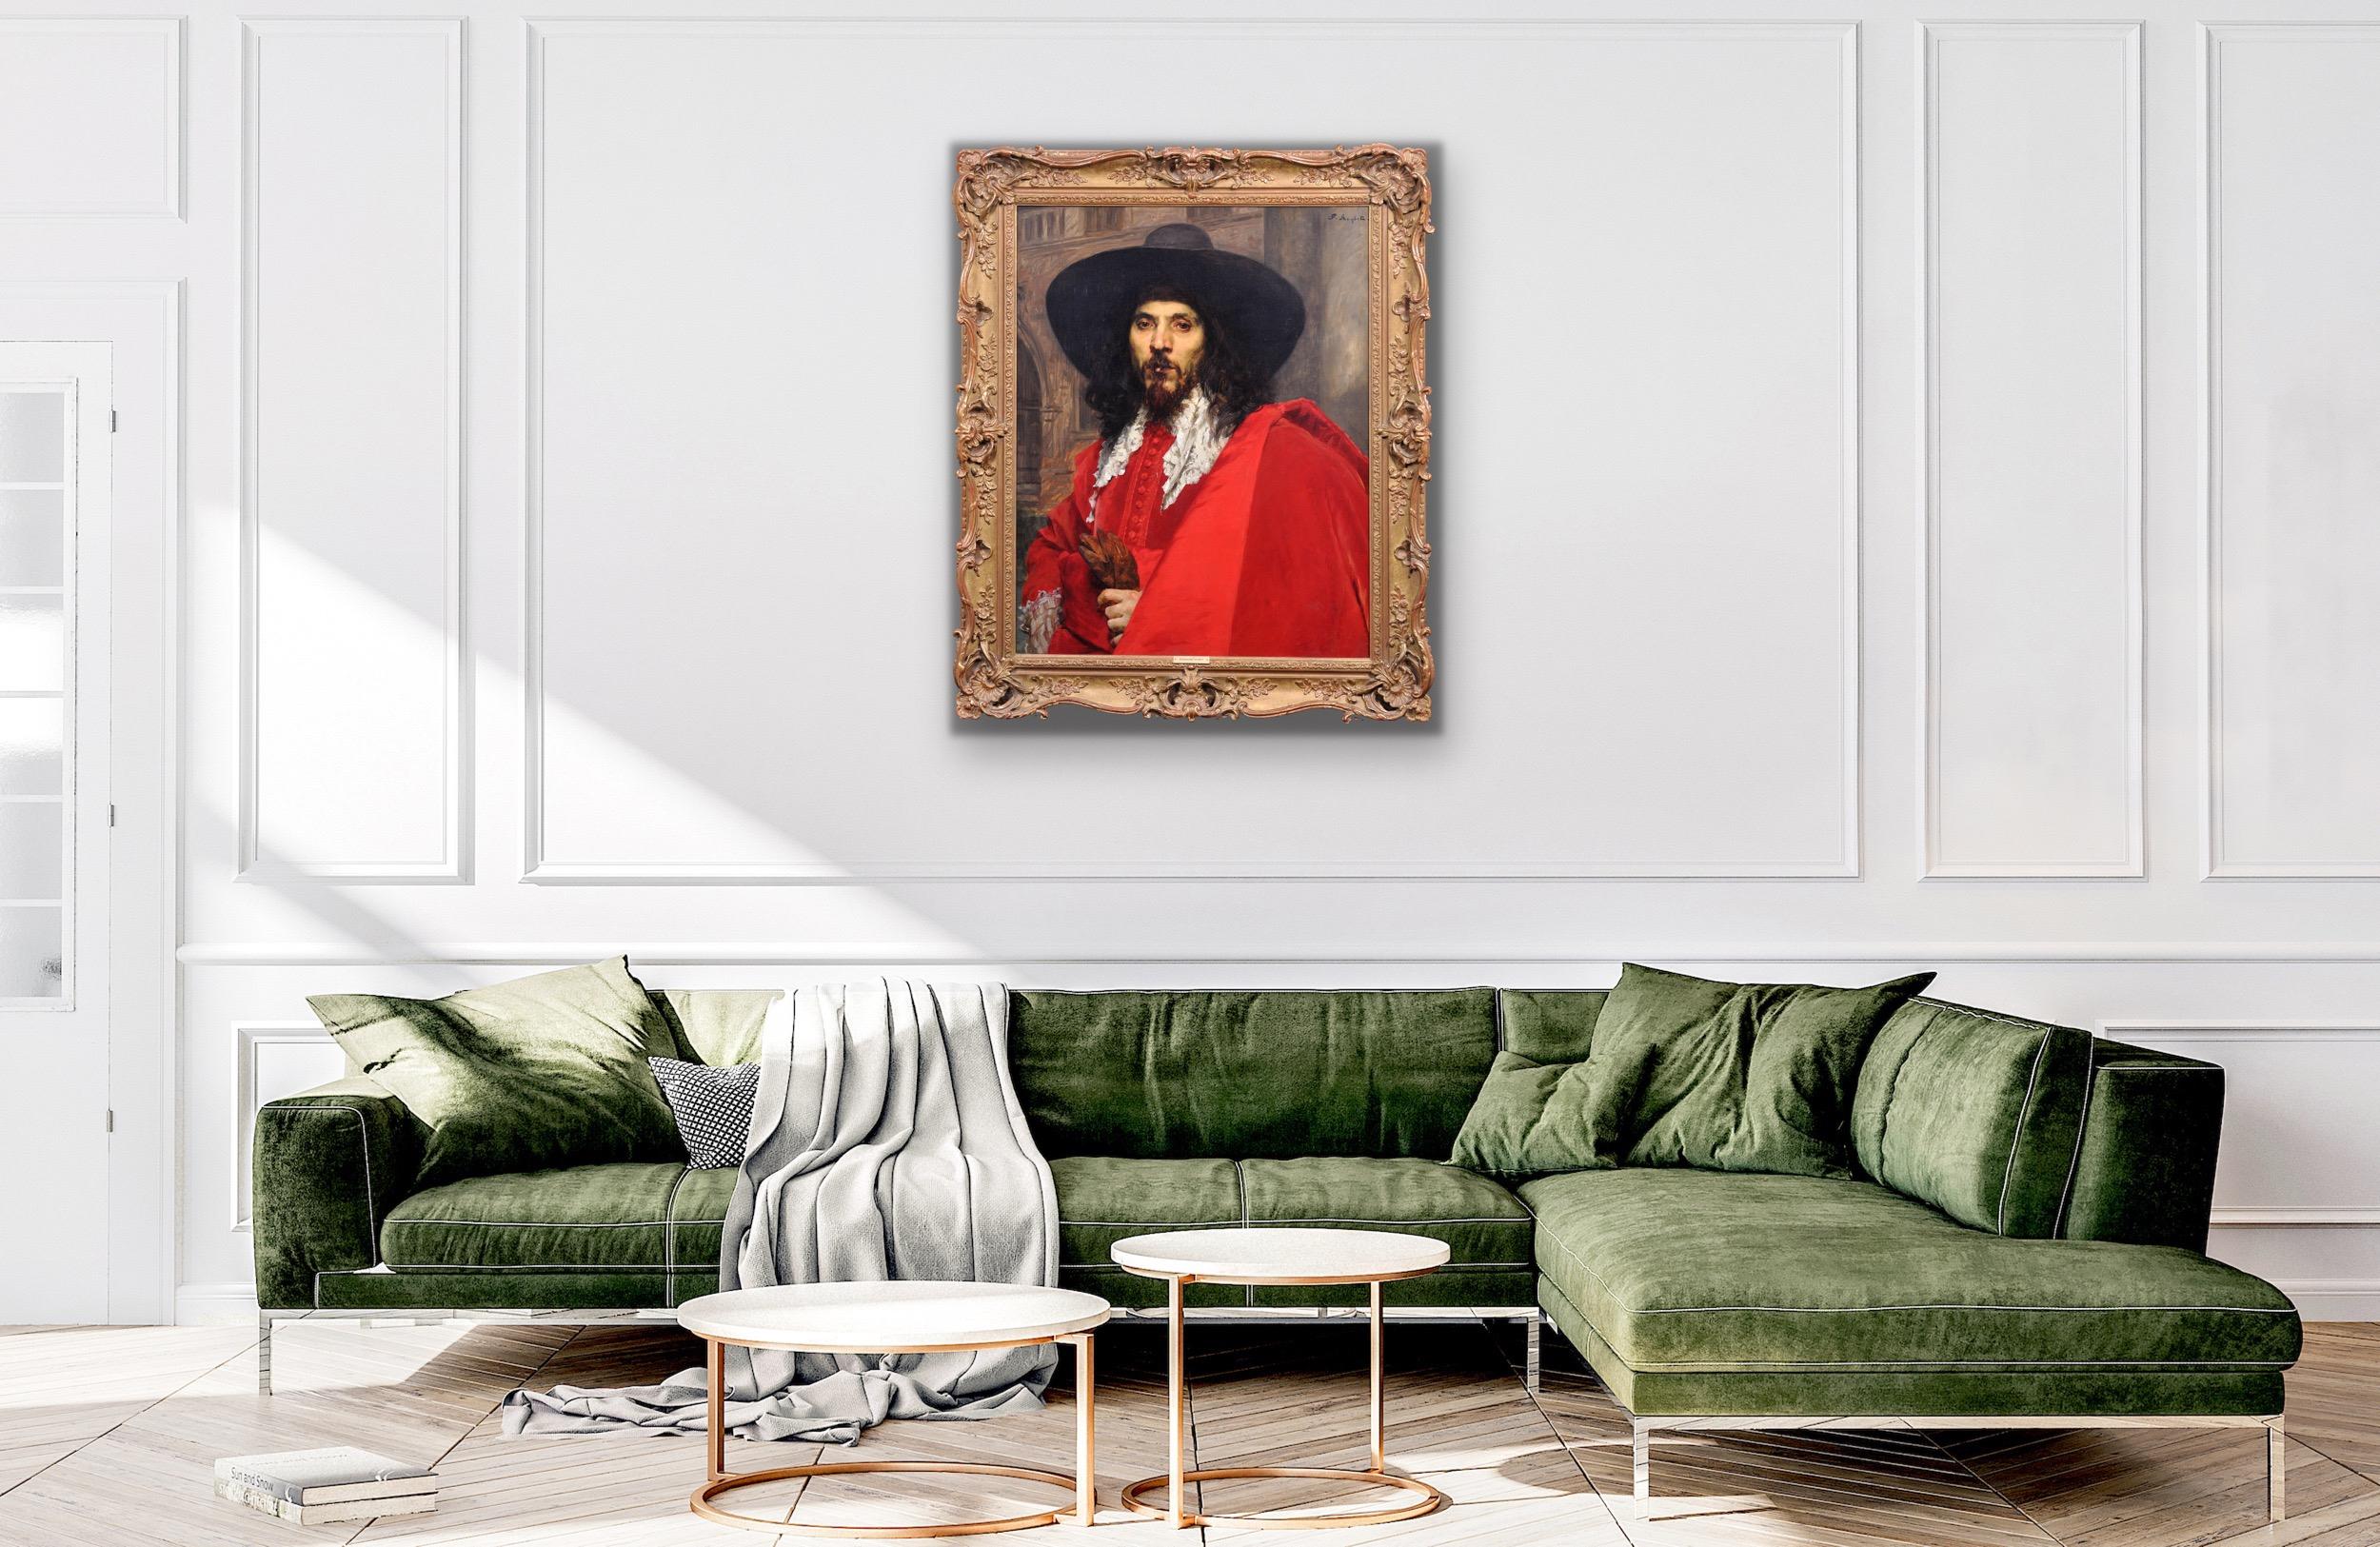 Le Mousquetaire.Musketeer.Cavalier.Spanish Tradition.Diego Velázquez Influence. For Sale 10